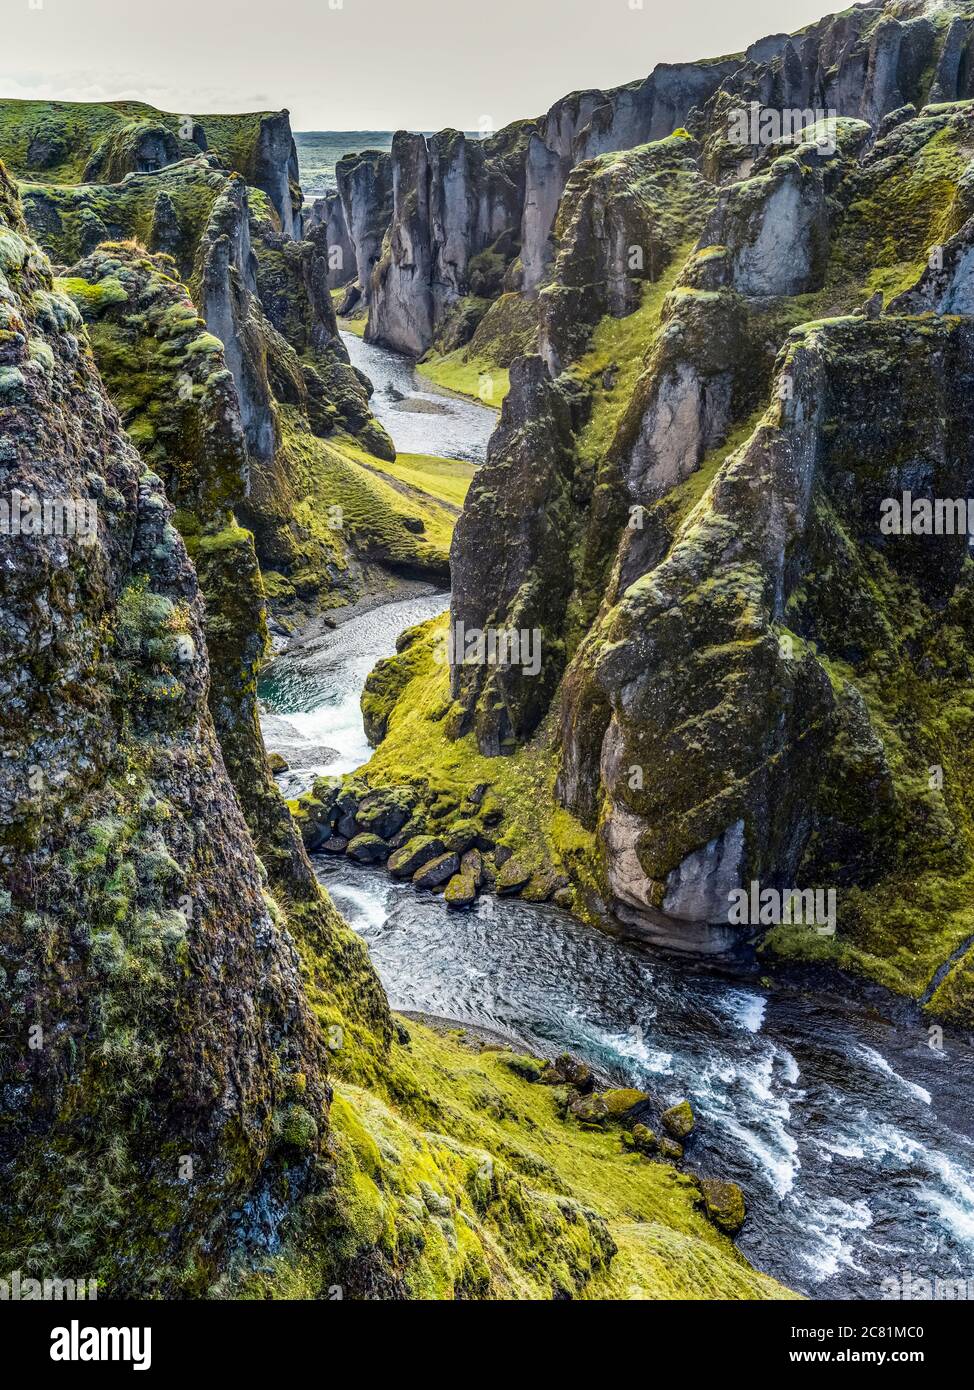 Fjadrargljufur is a magnificent and massive canyon, about 100 meters deep and about two kilometres long. The canyon has sheer walls Stock Photo